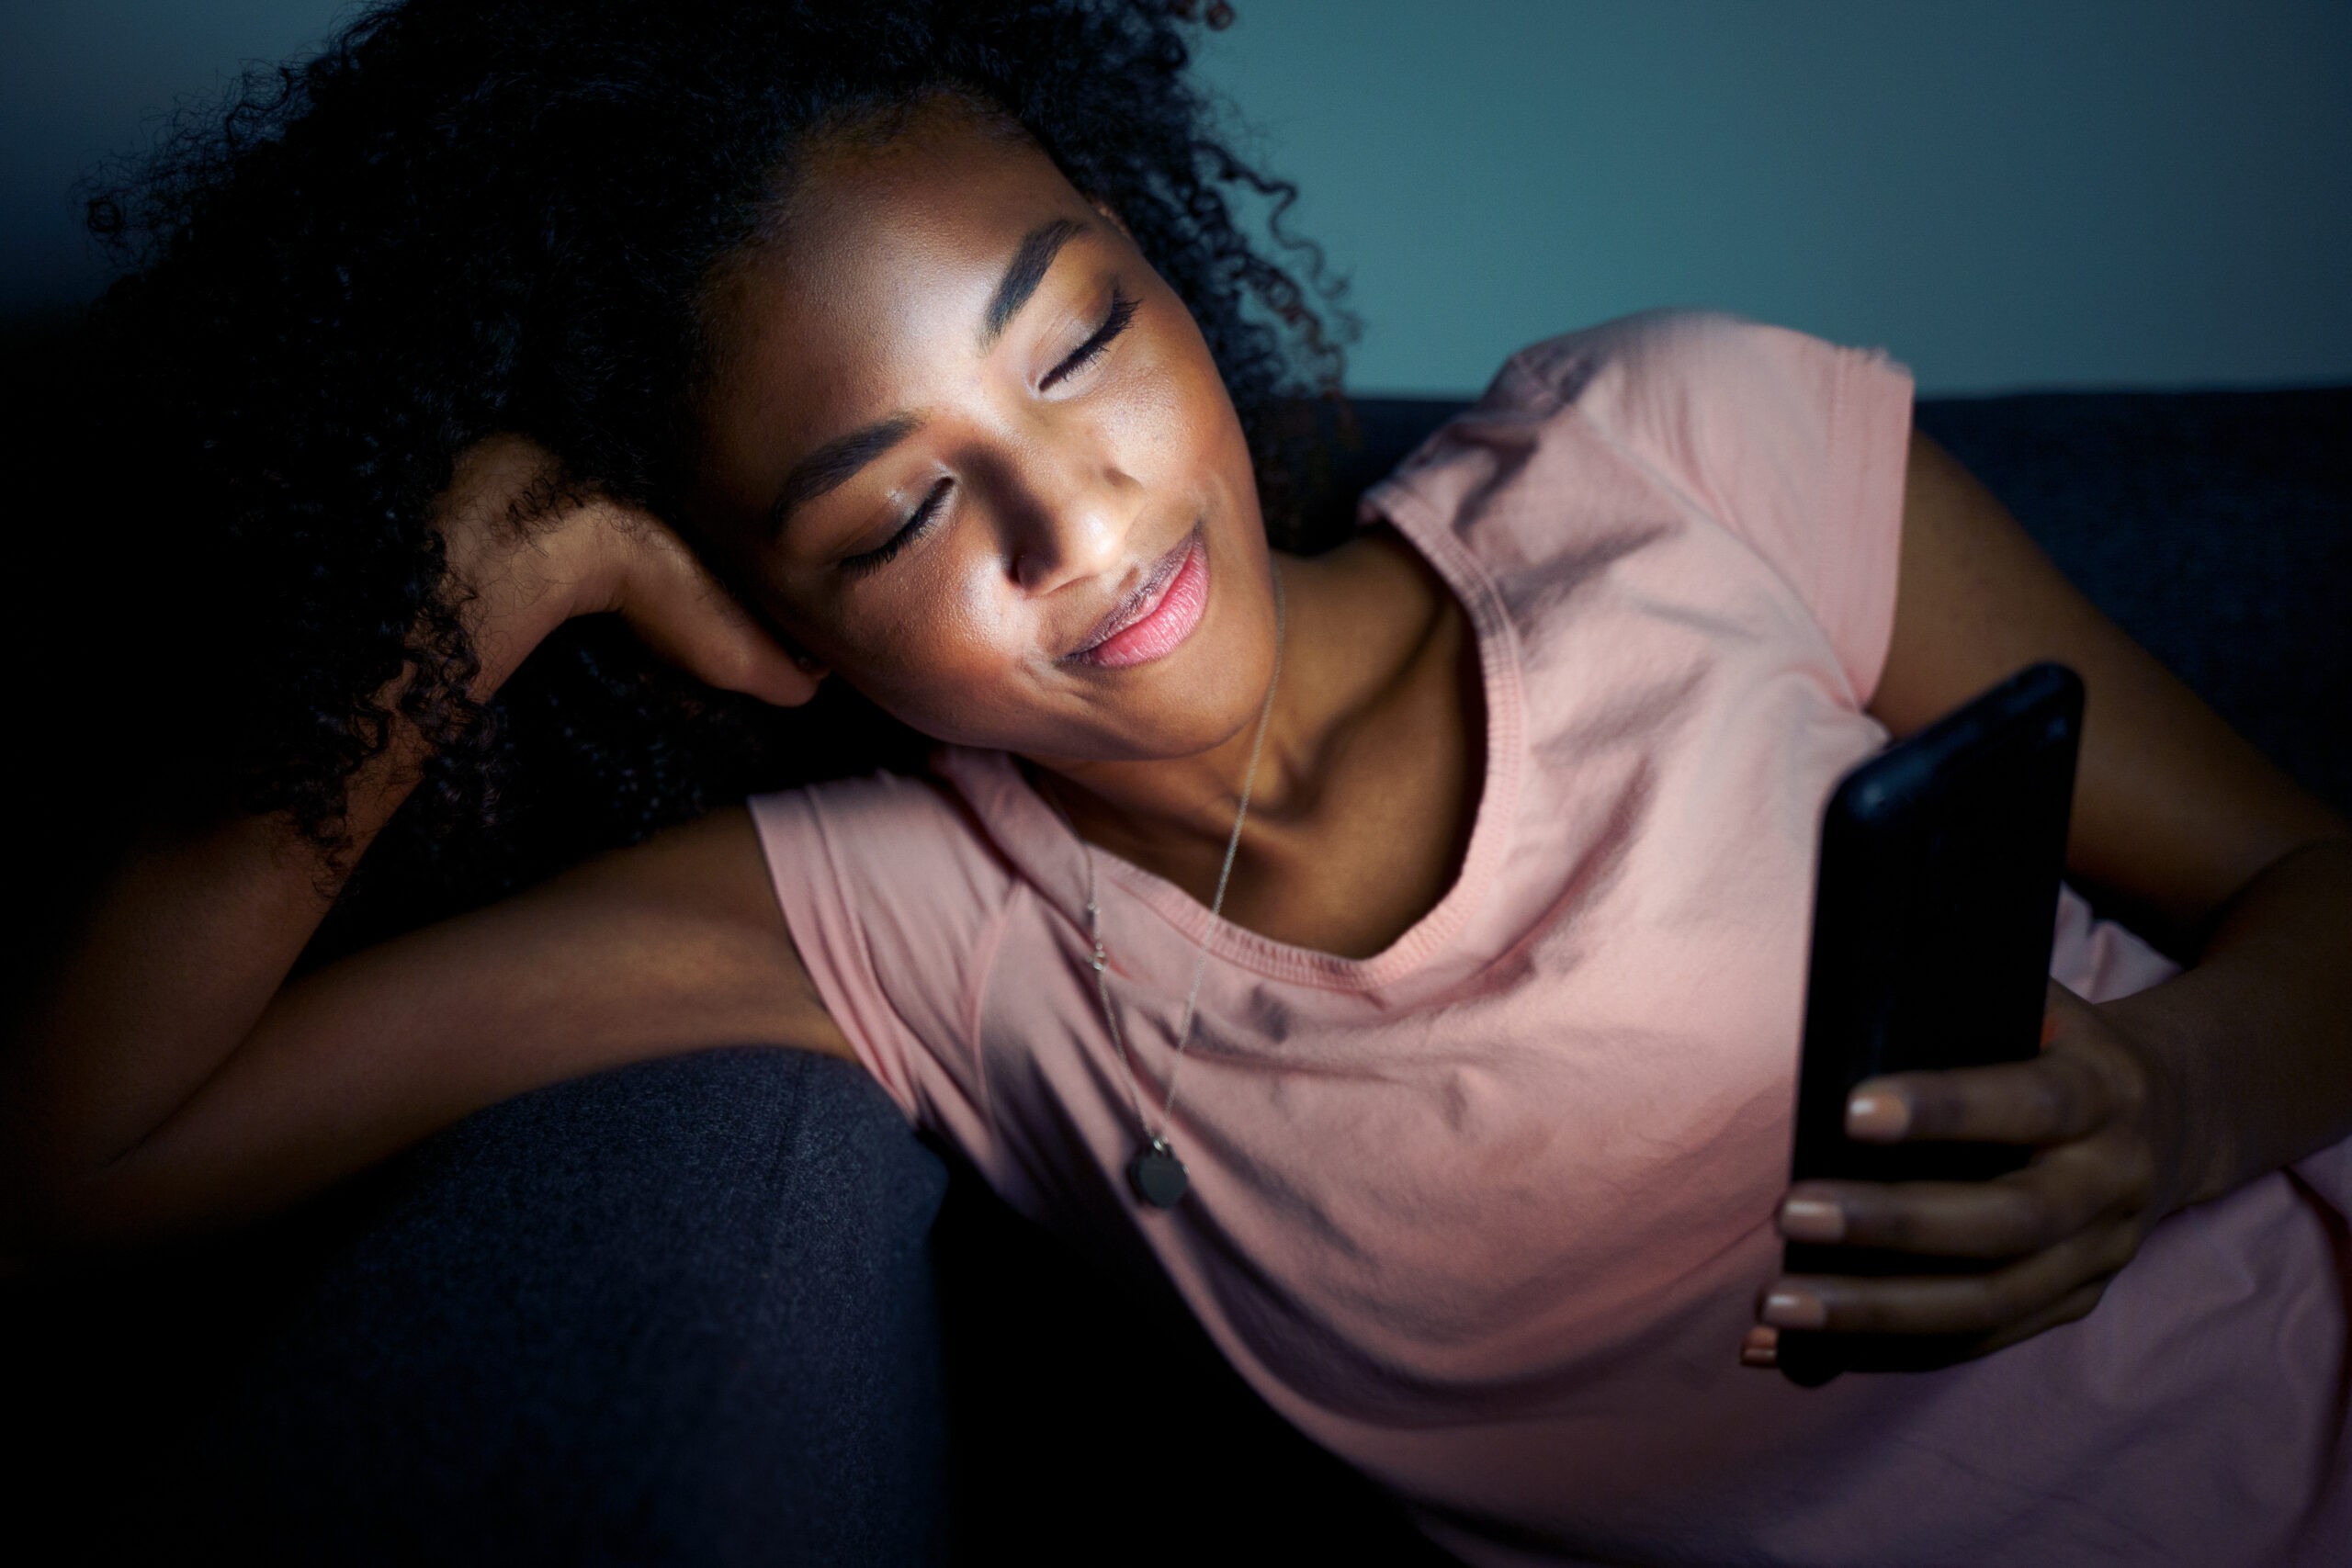 Woman finding love online smiles at her phone while leaning on her hand. It's dark and the phone light shows on her face.